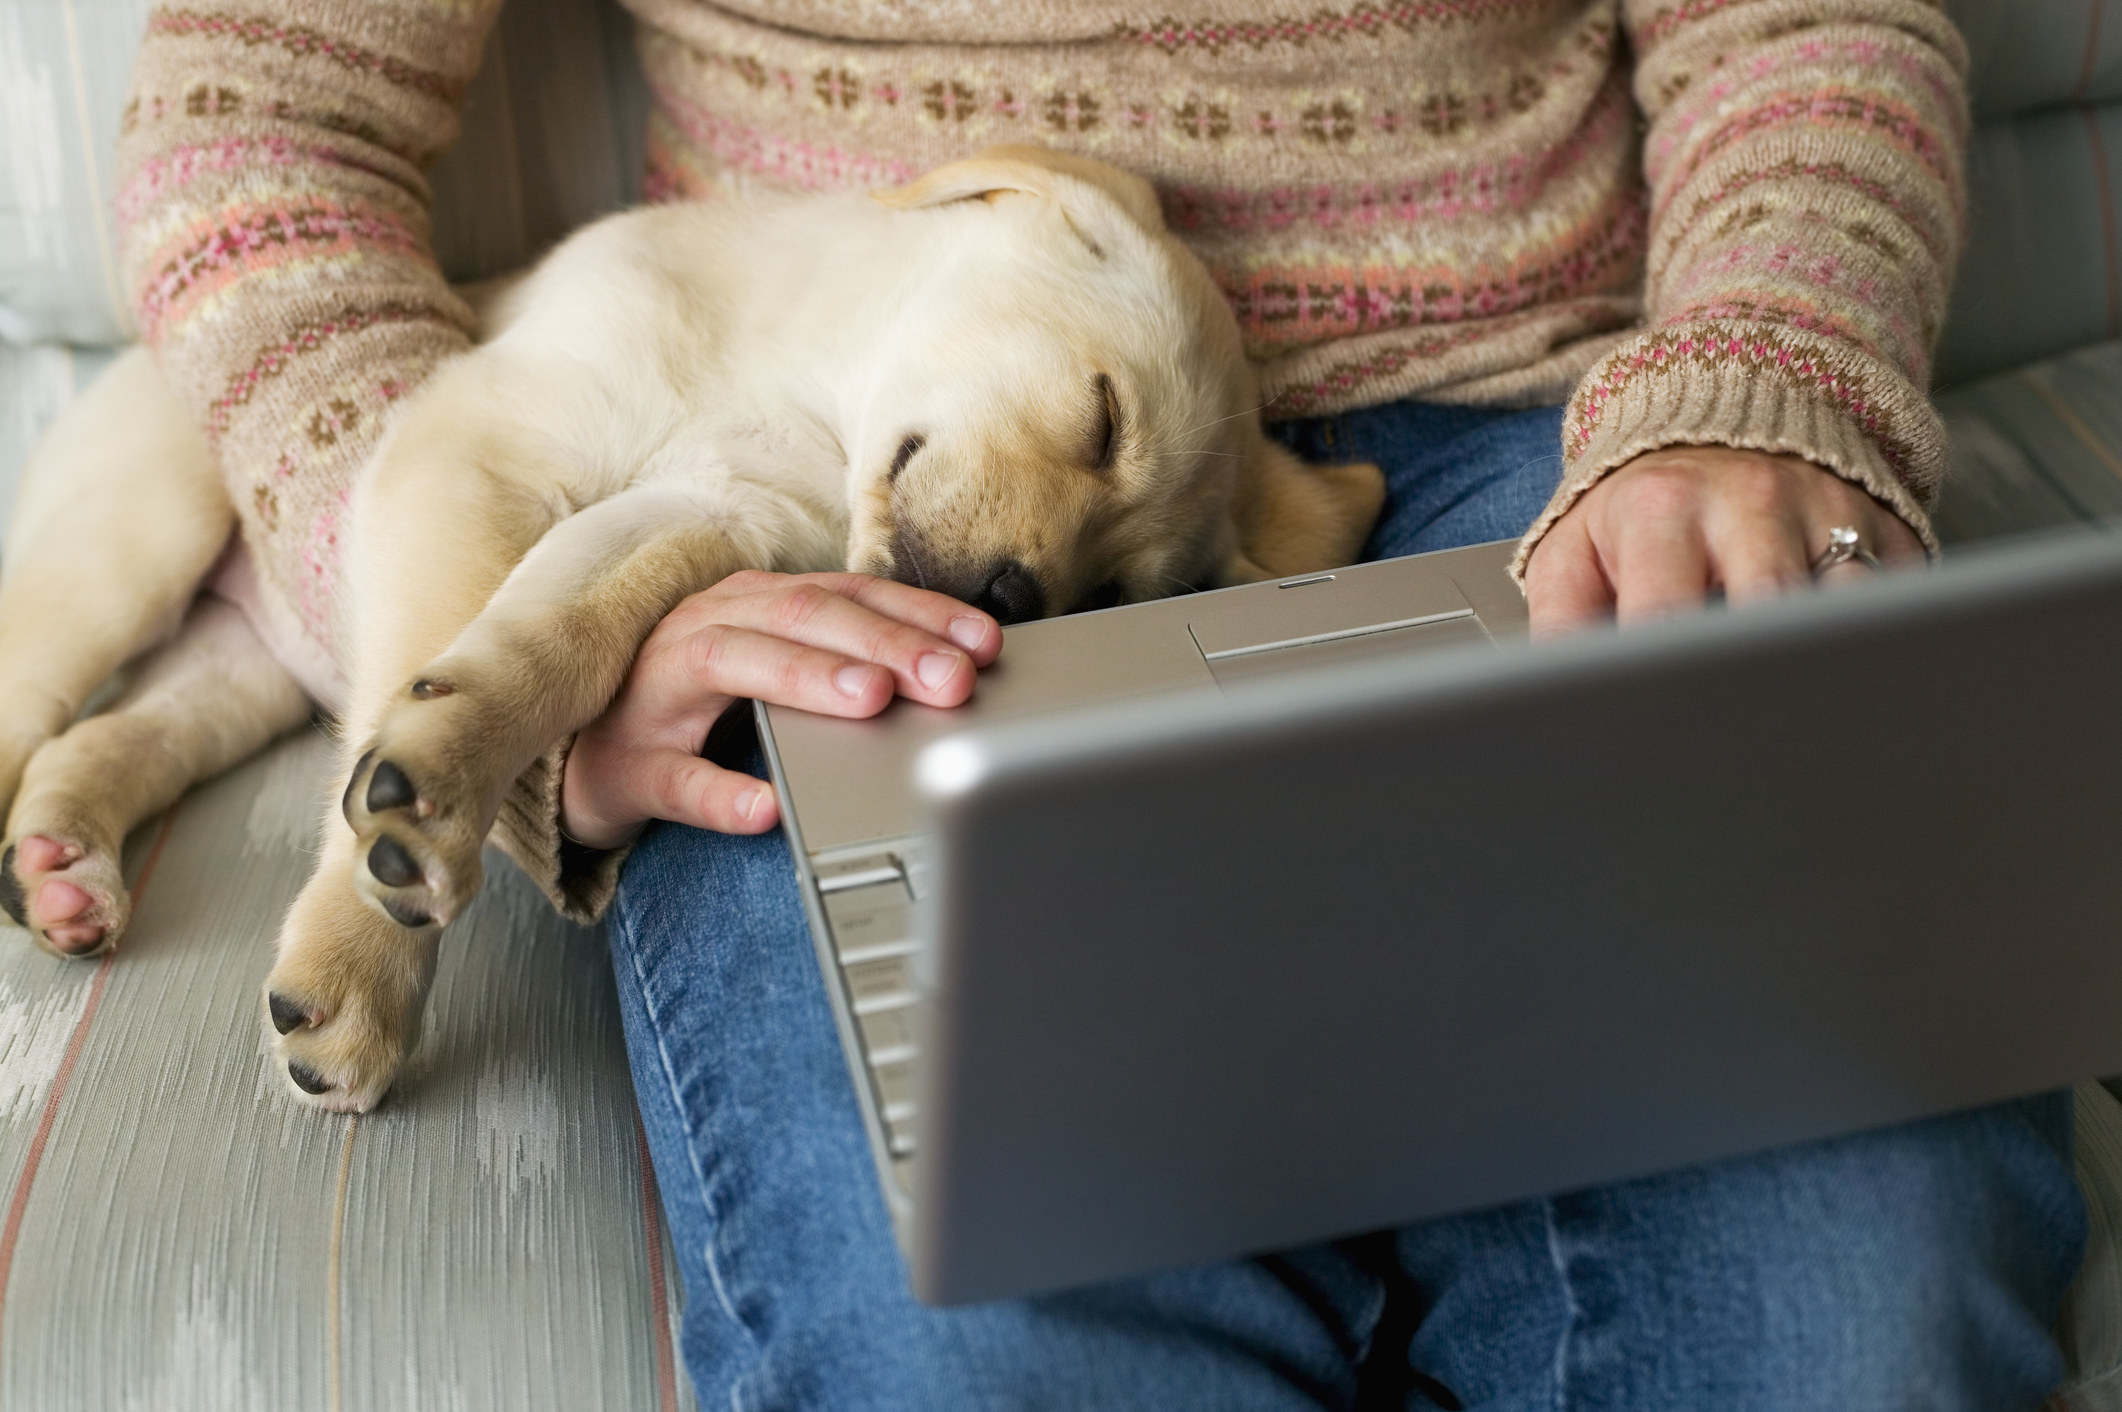 A woman using a laptop with a puppy sleeping on her.